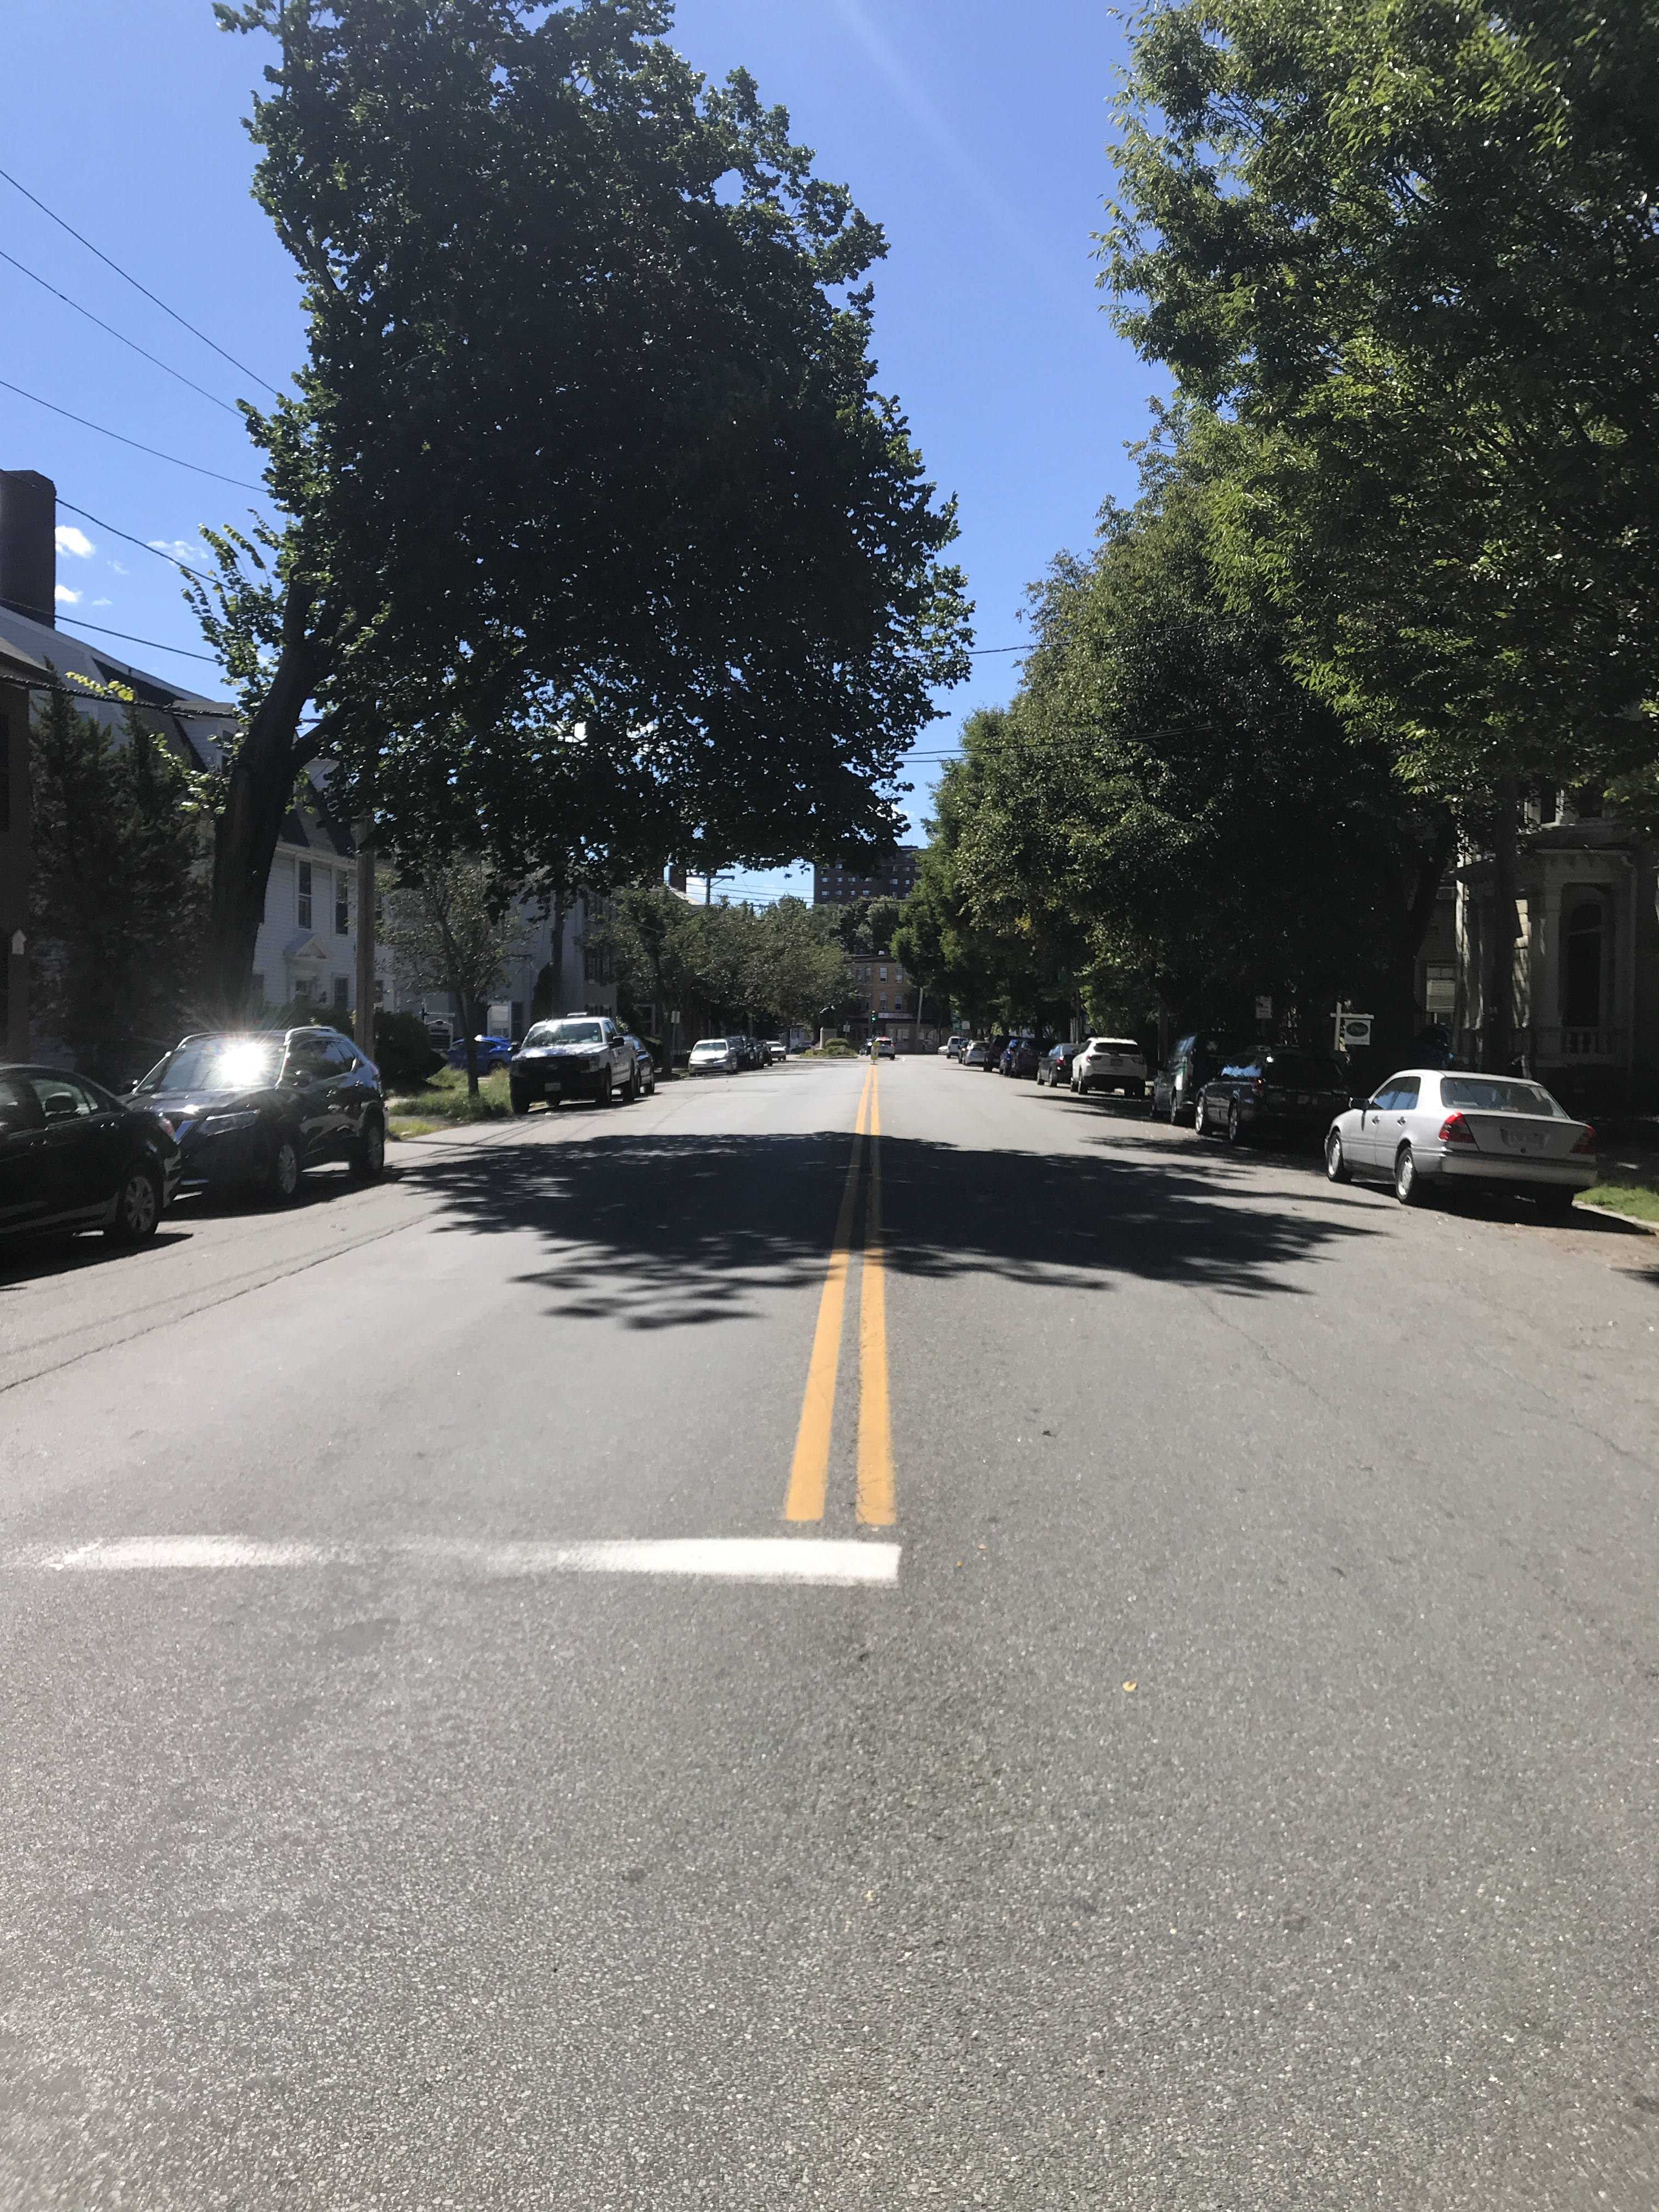 View down the center of Essex Street from Flint Street, looking west. Both sides of the street are lined with trees and cars. In the far distance Salem Heights can be seen above the trees.